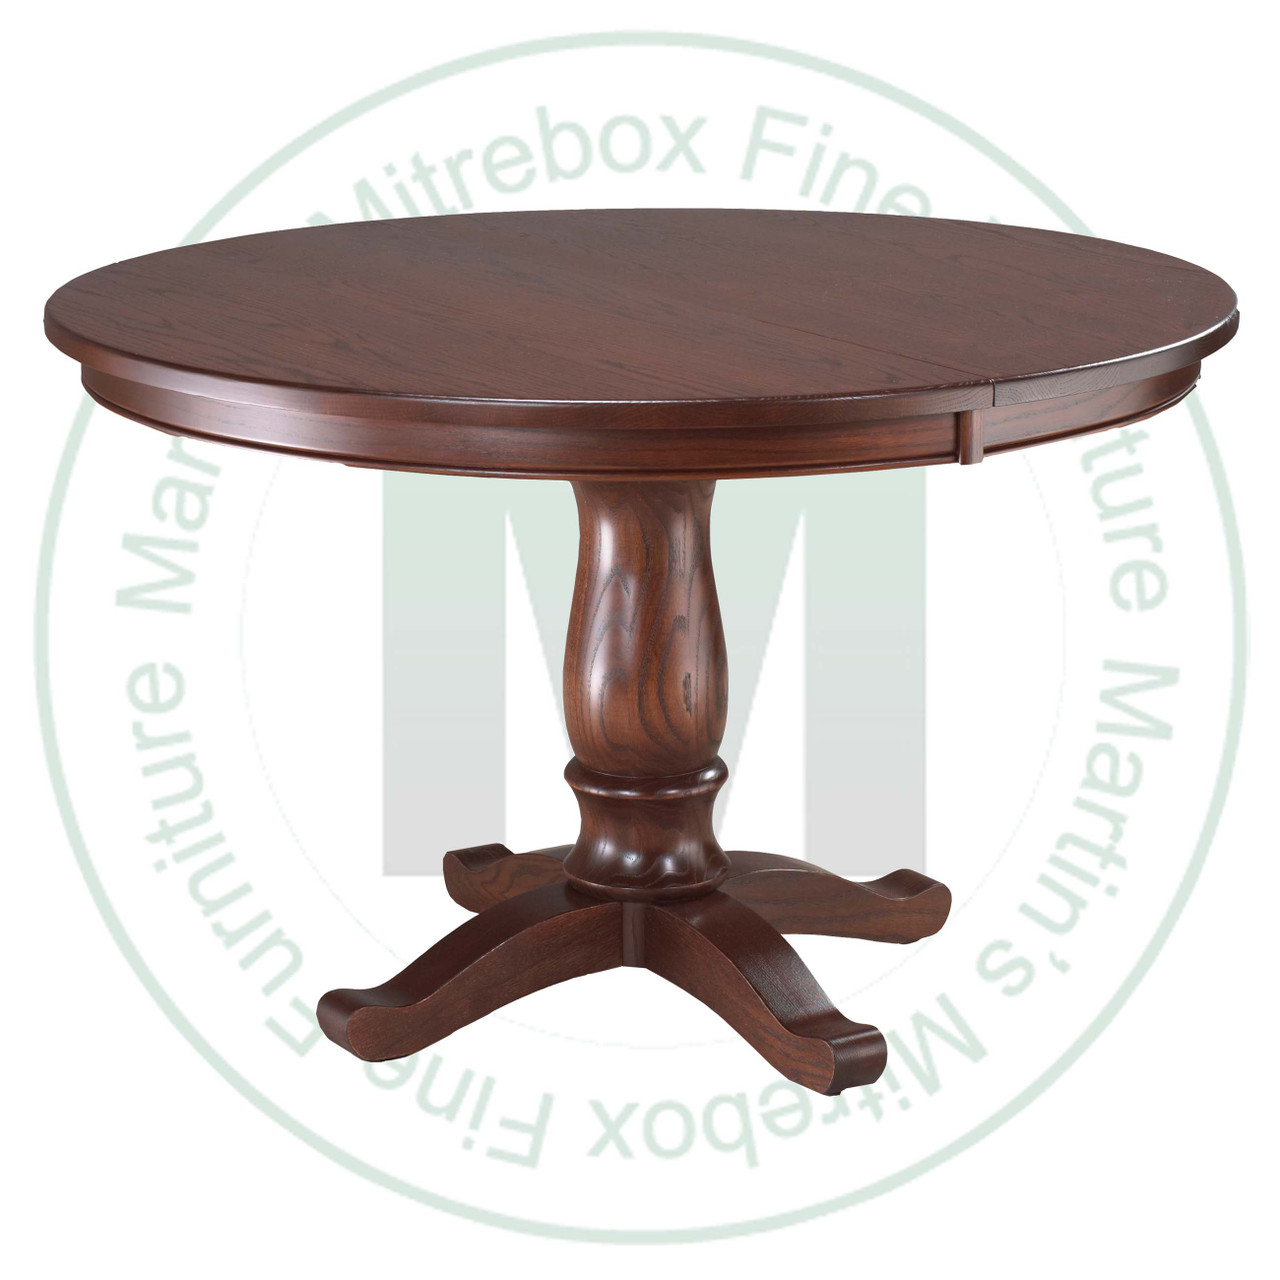 Oak Kimberly Crest Single Pedestal Table 54''D x 54''W x 30''H With 2 - 12'' Leaves Table. Table Has 1'' Thick Top.